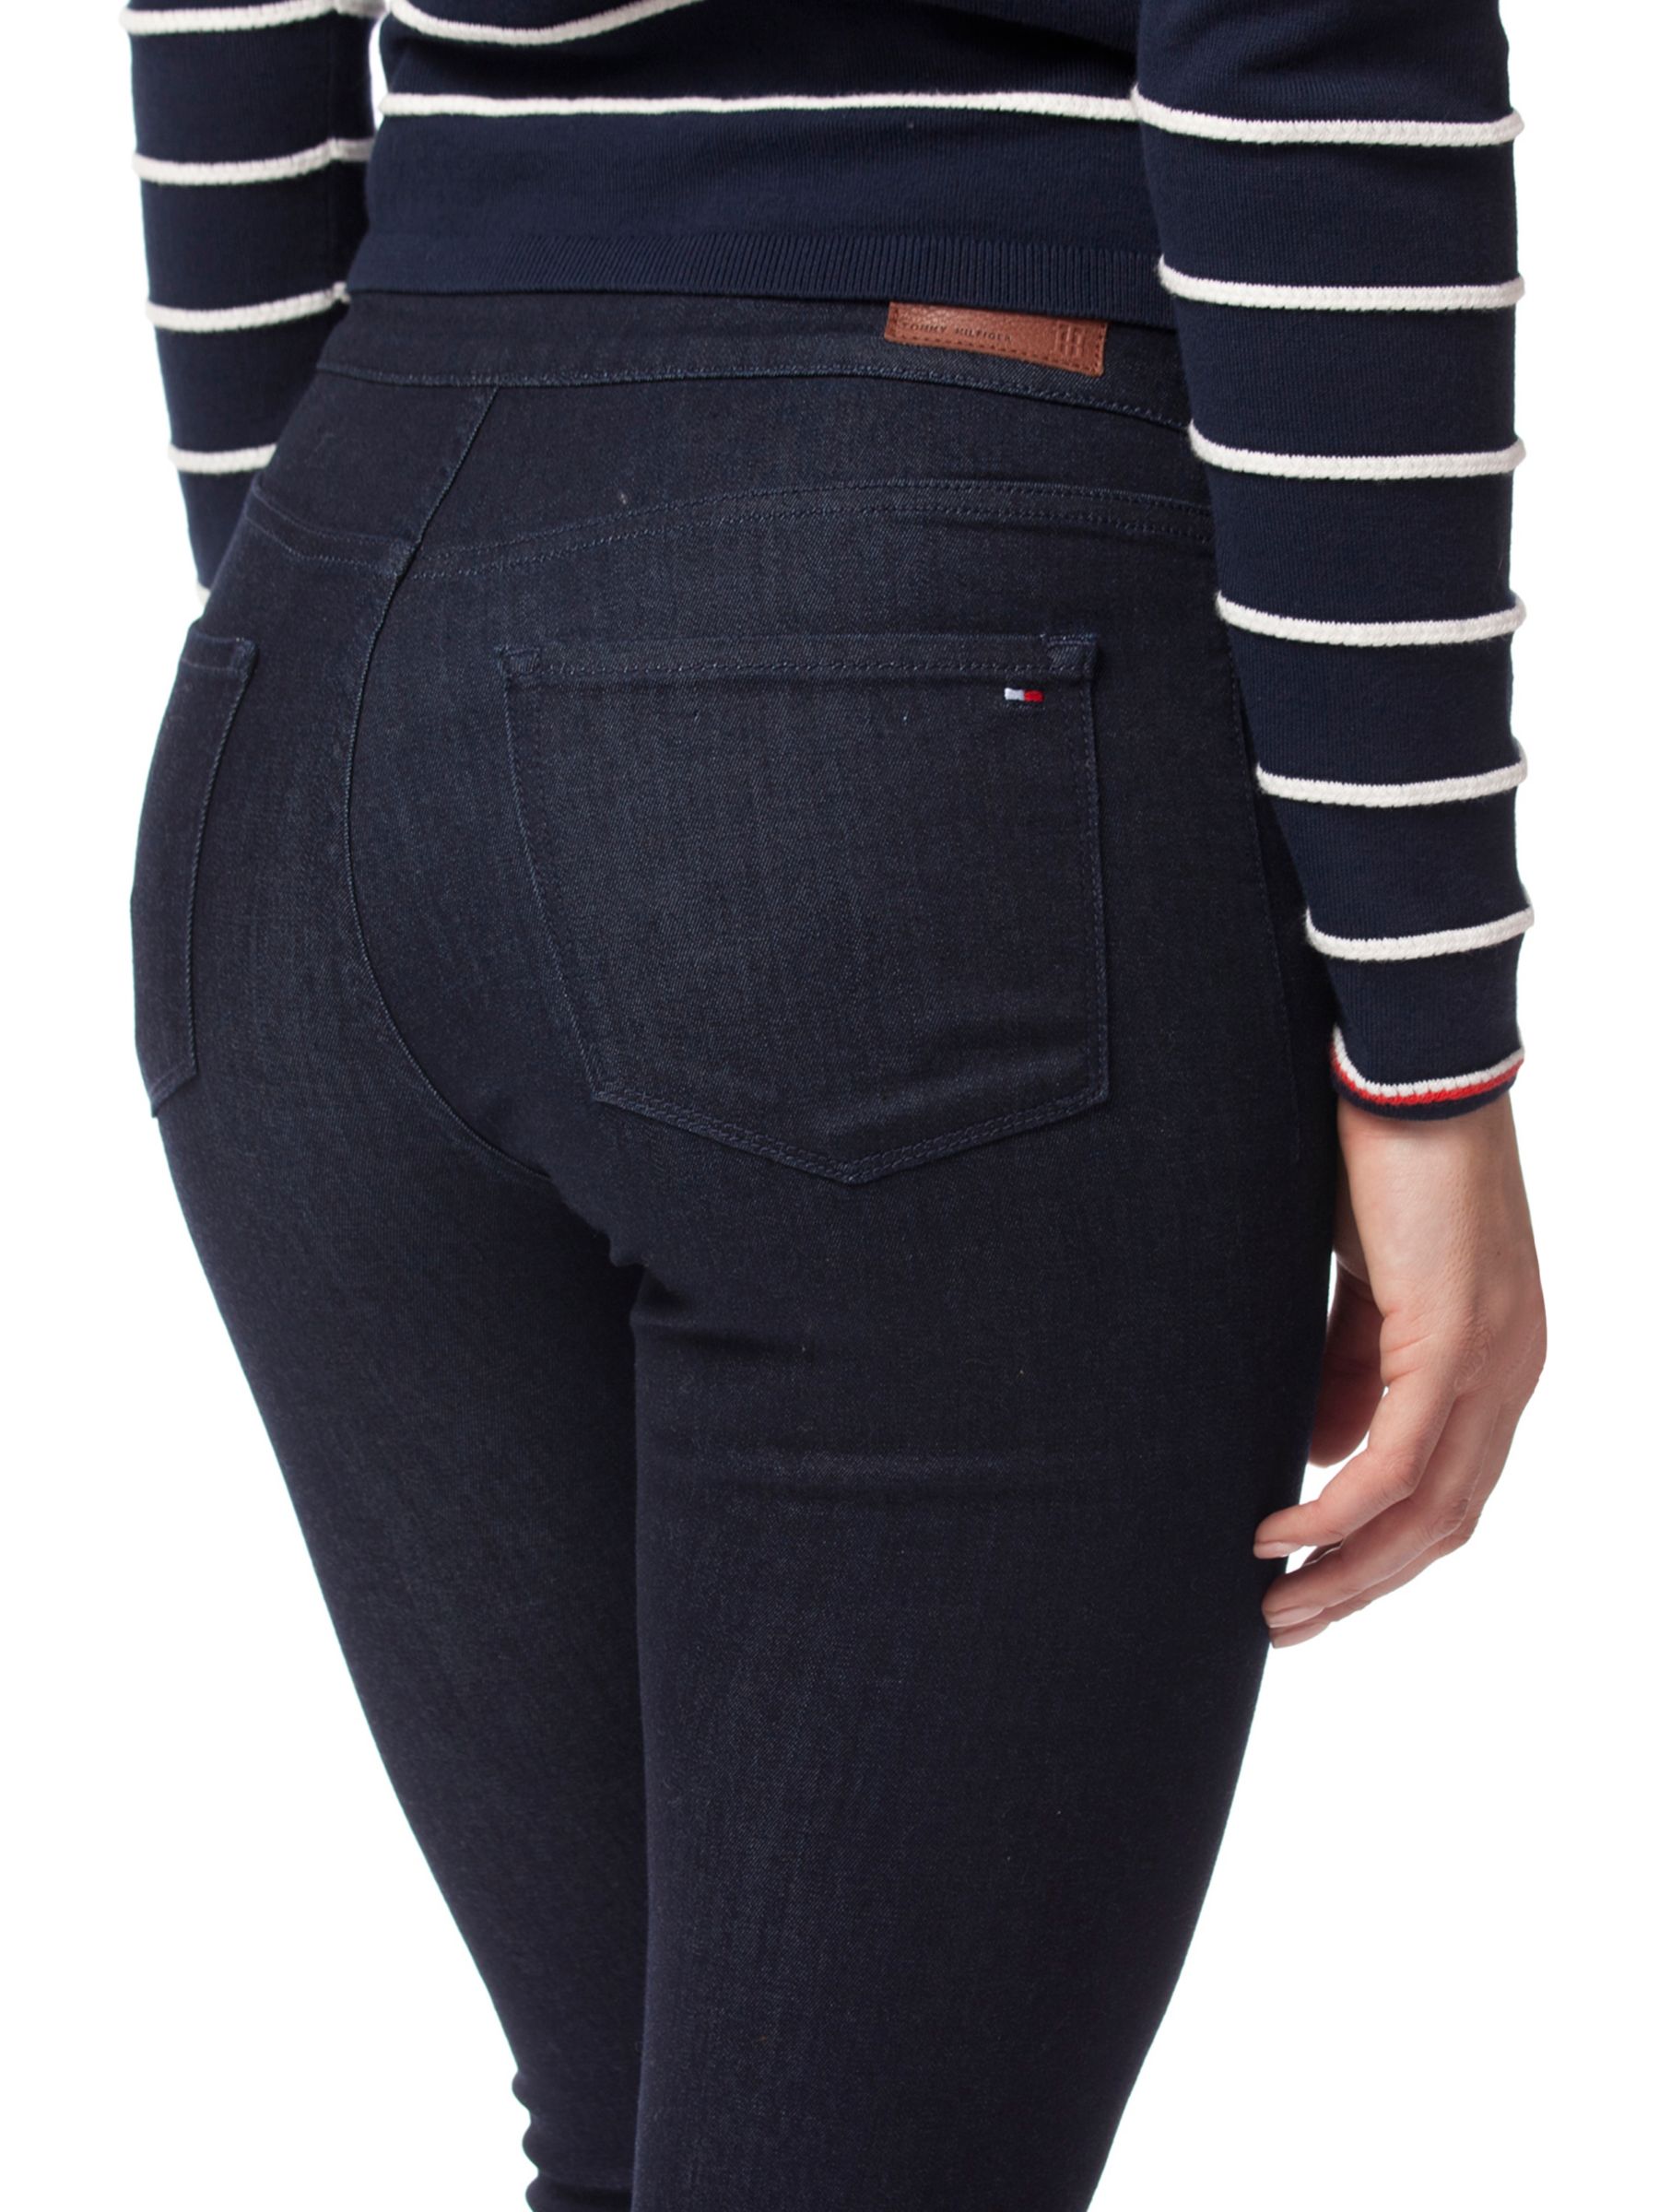 Tommy Hilfiger Como Pull-On Seamless 